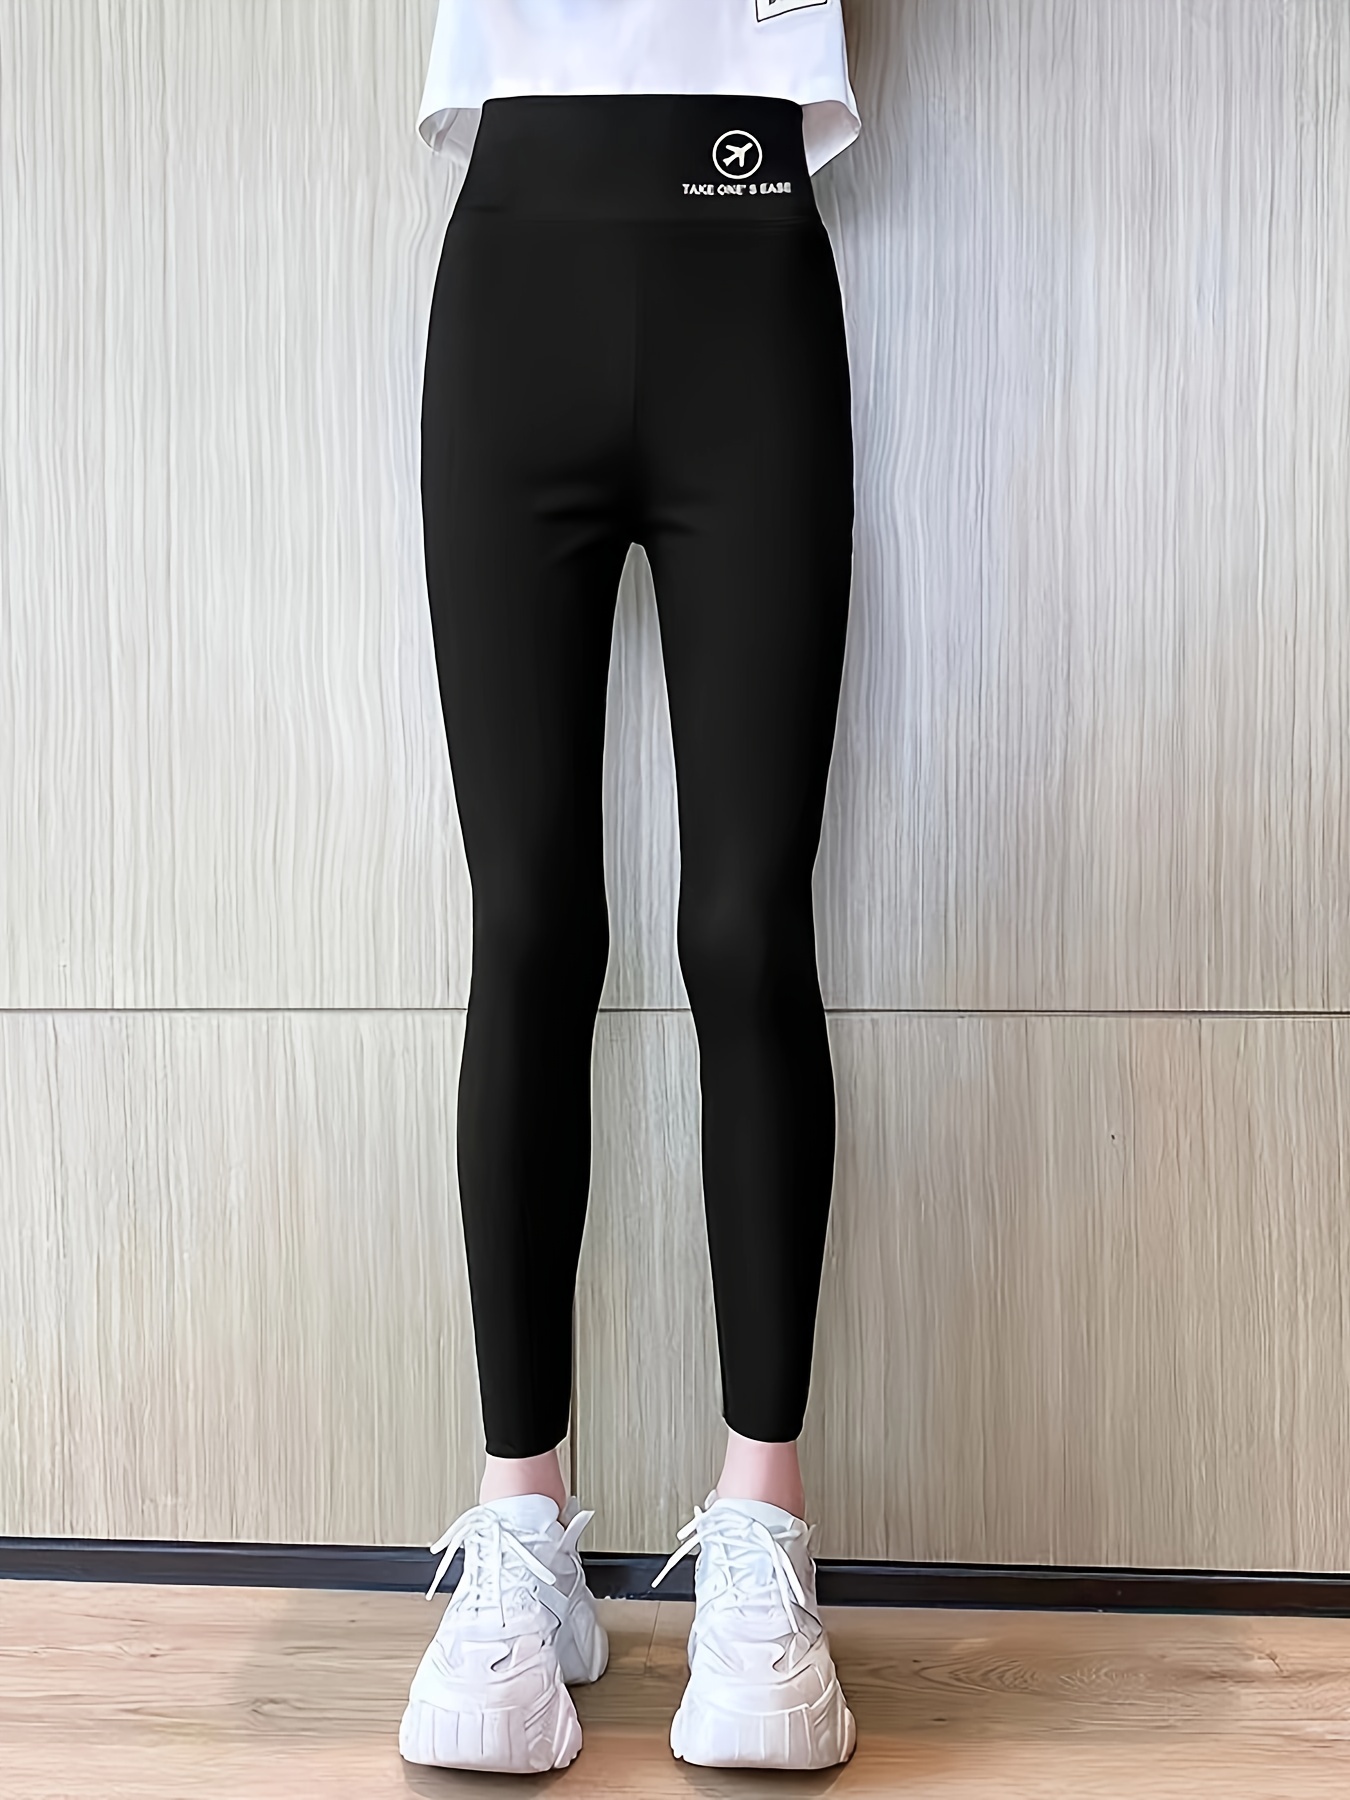 Solid Color Fleece Sports Leggings For Women High Waist Warm Workout Sport  Exercise Cycling Pants Women's Activewear